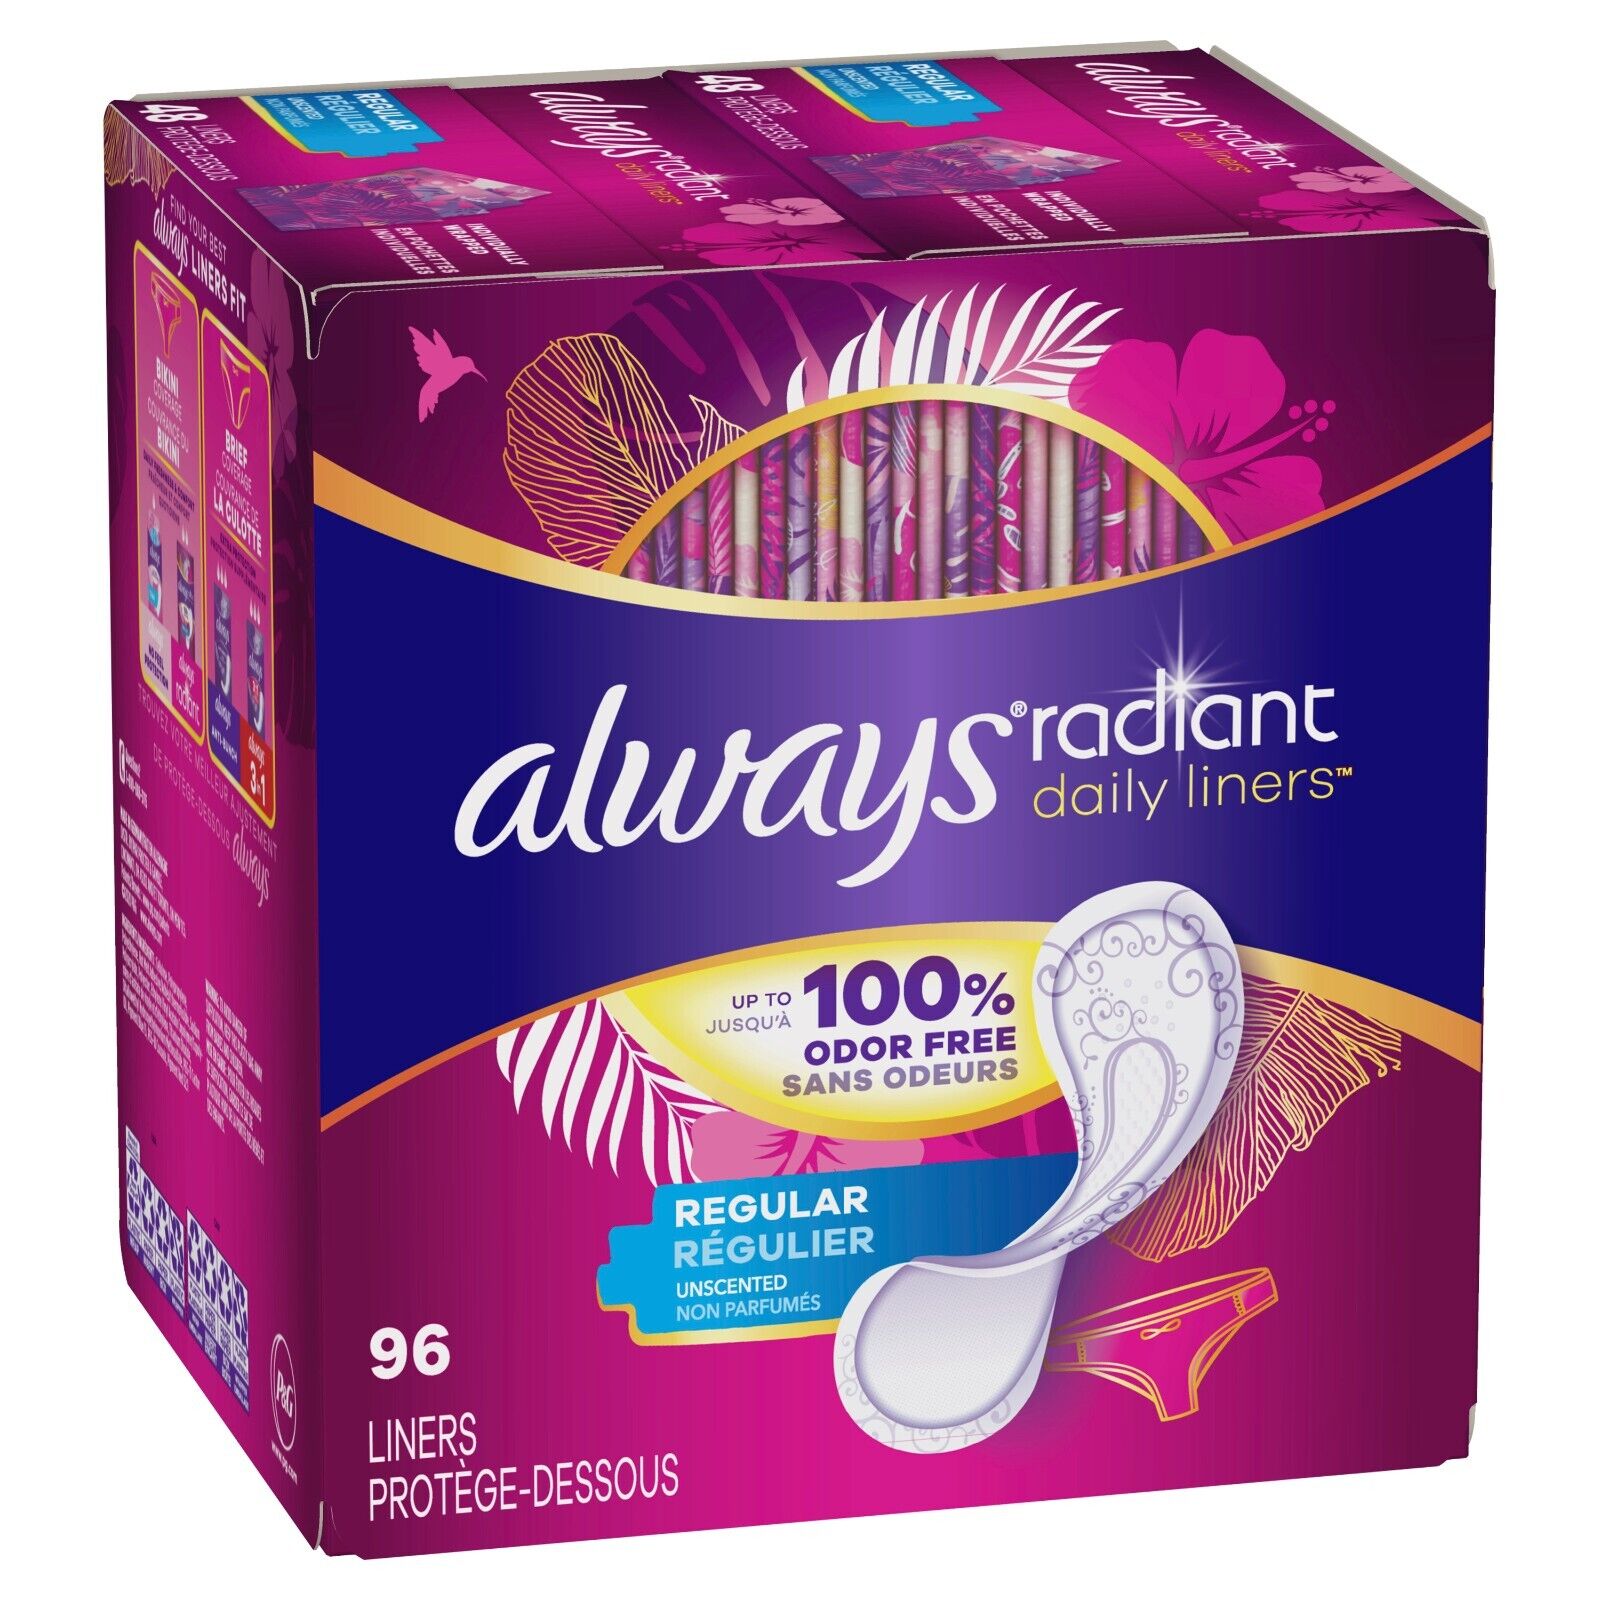 Case Of 96 Always Radiant Regular 100% Odor Free Unscented Daily Liners